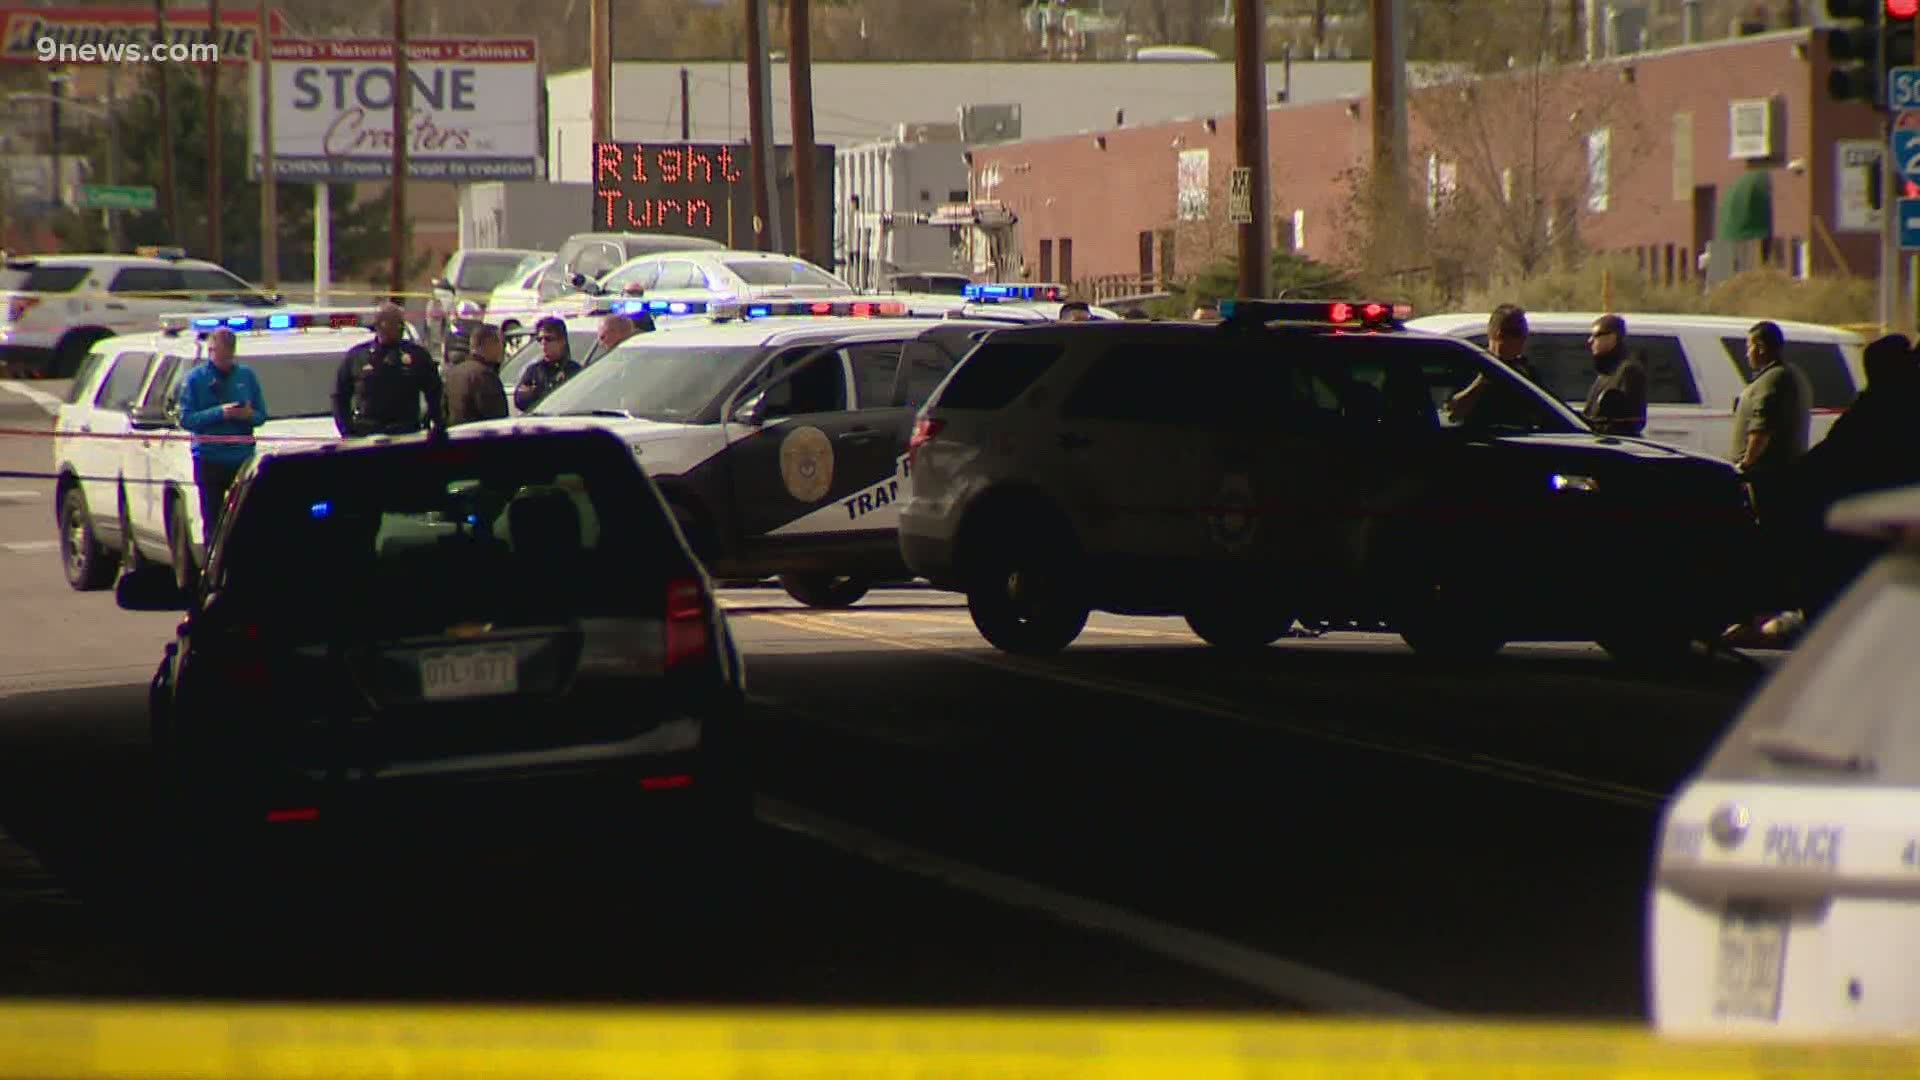 The district attorney says 3 officers were justified in shooting at the suspect who was armed with a rifle and led officers on a chase last October.